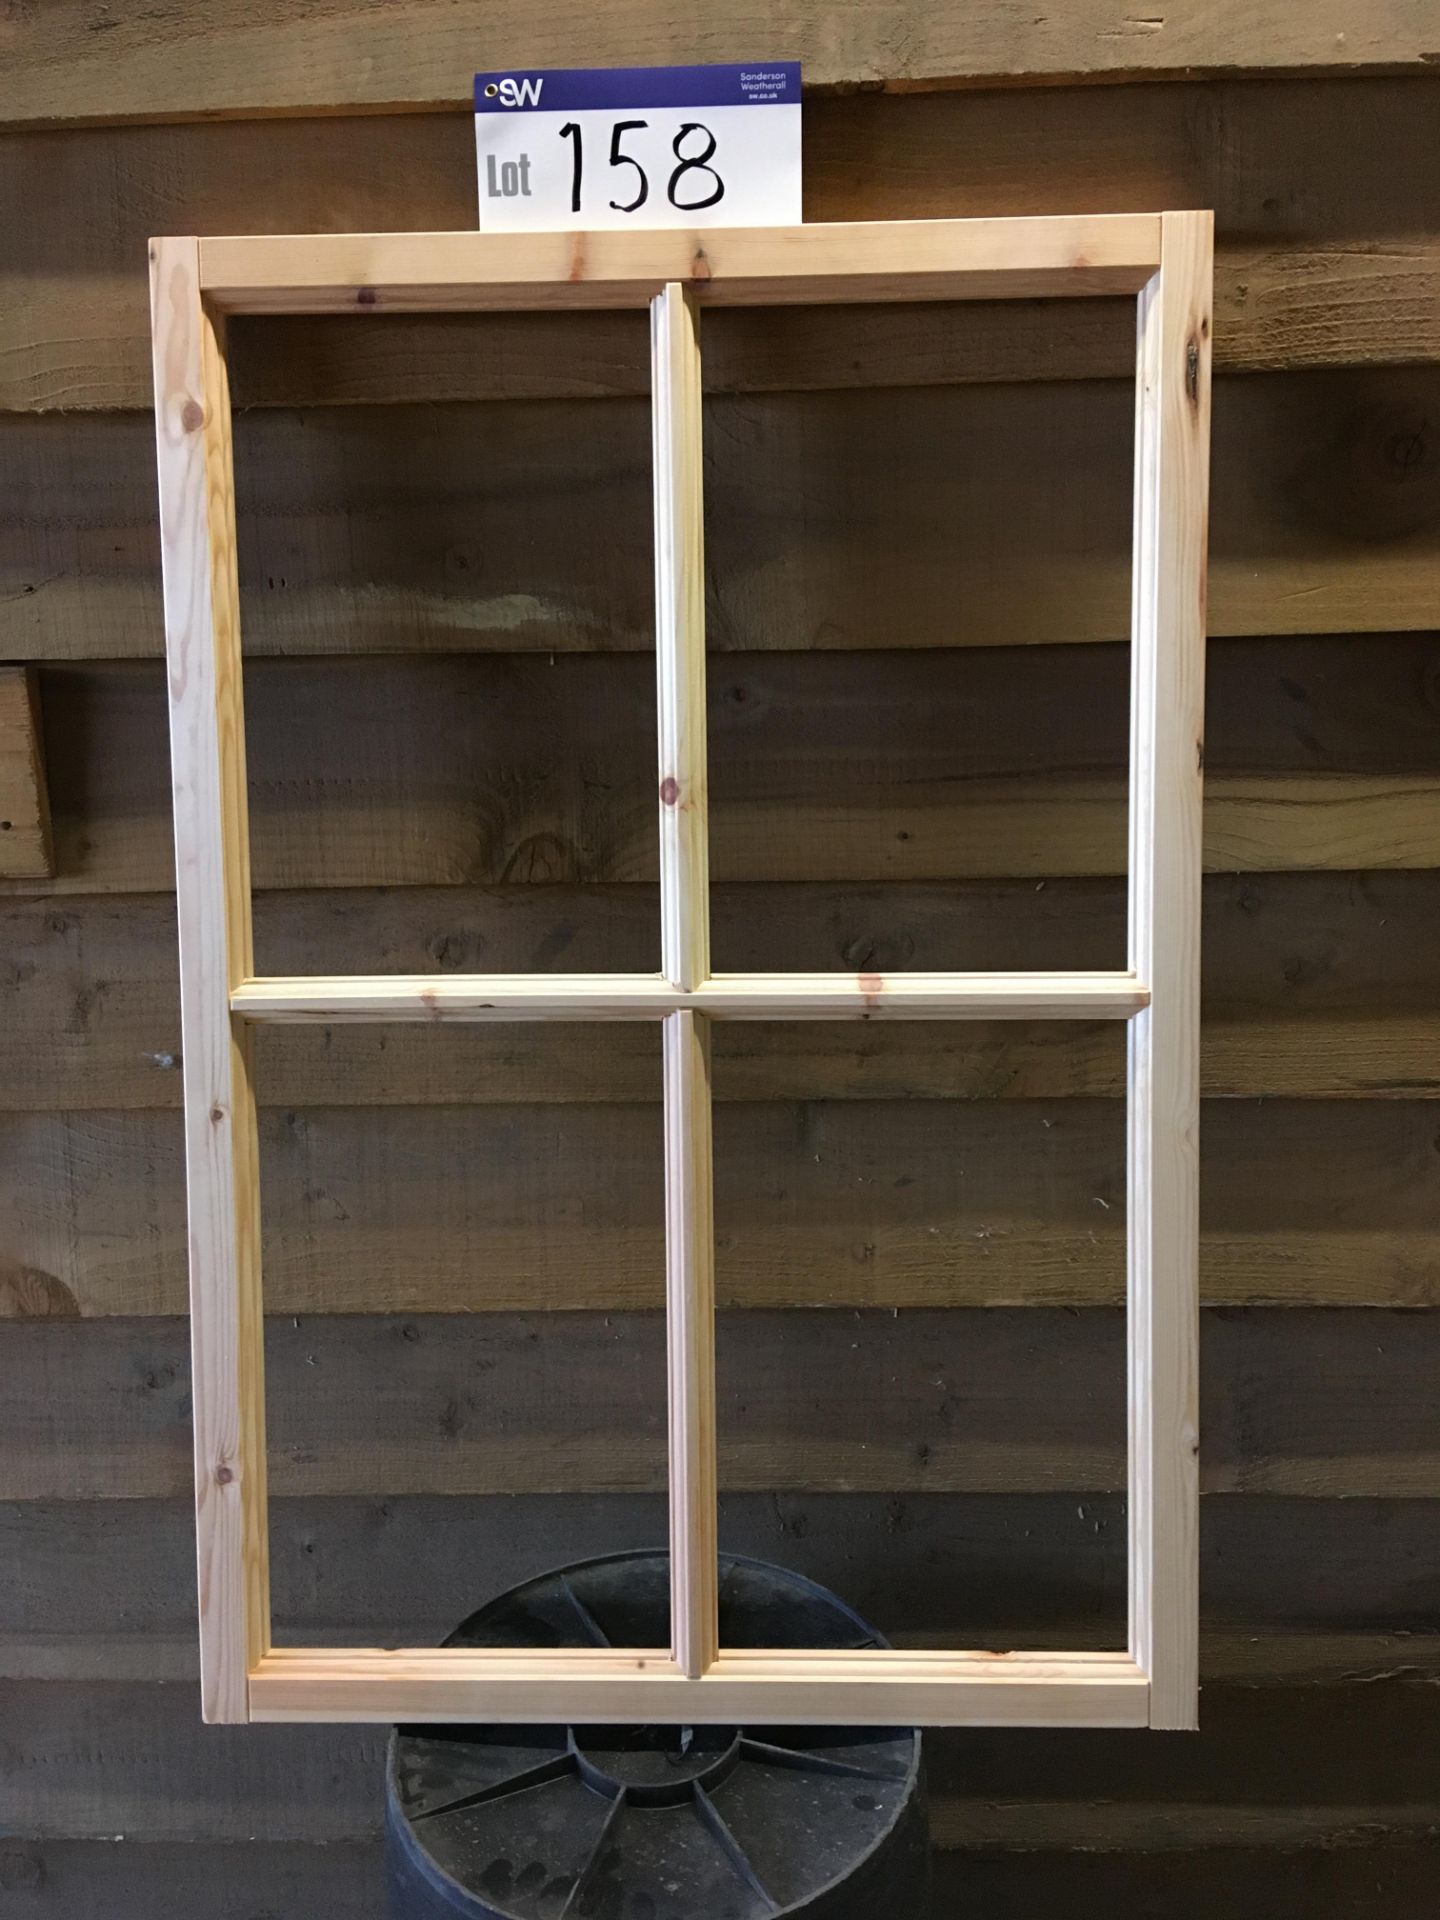 20 x Goergian Casements, approx. 998mm x 685mm rebated (additional lot to auction catalogue)